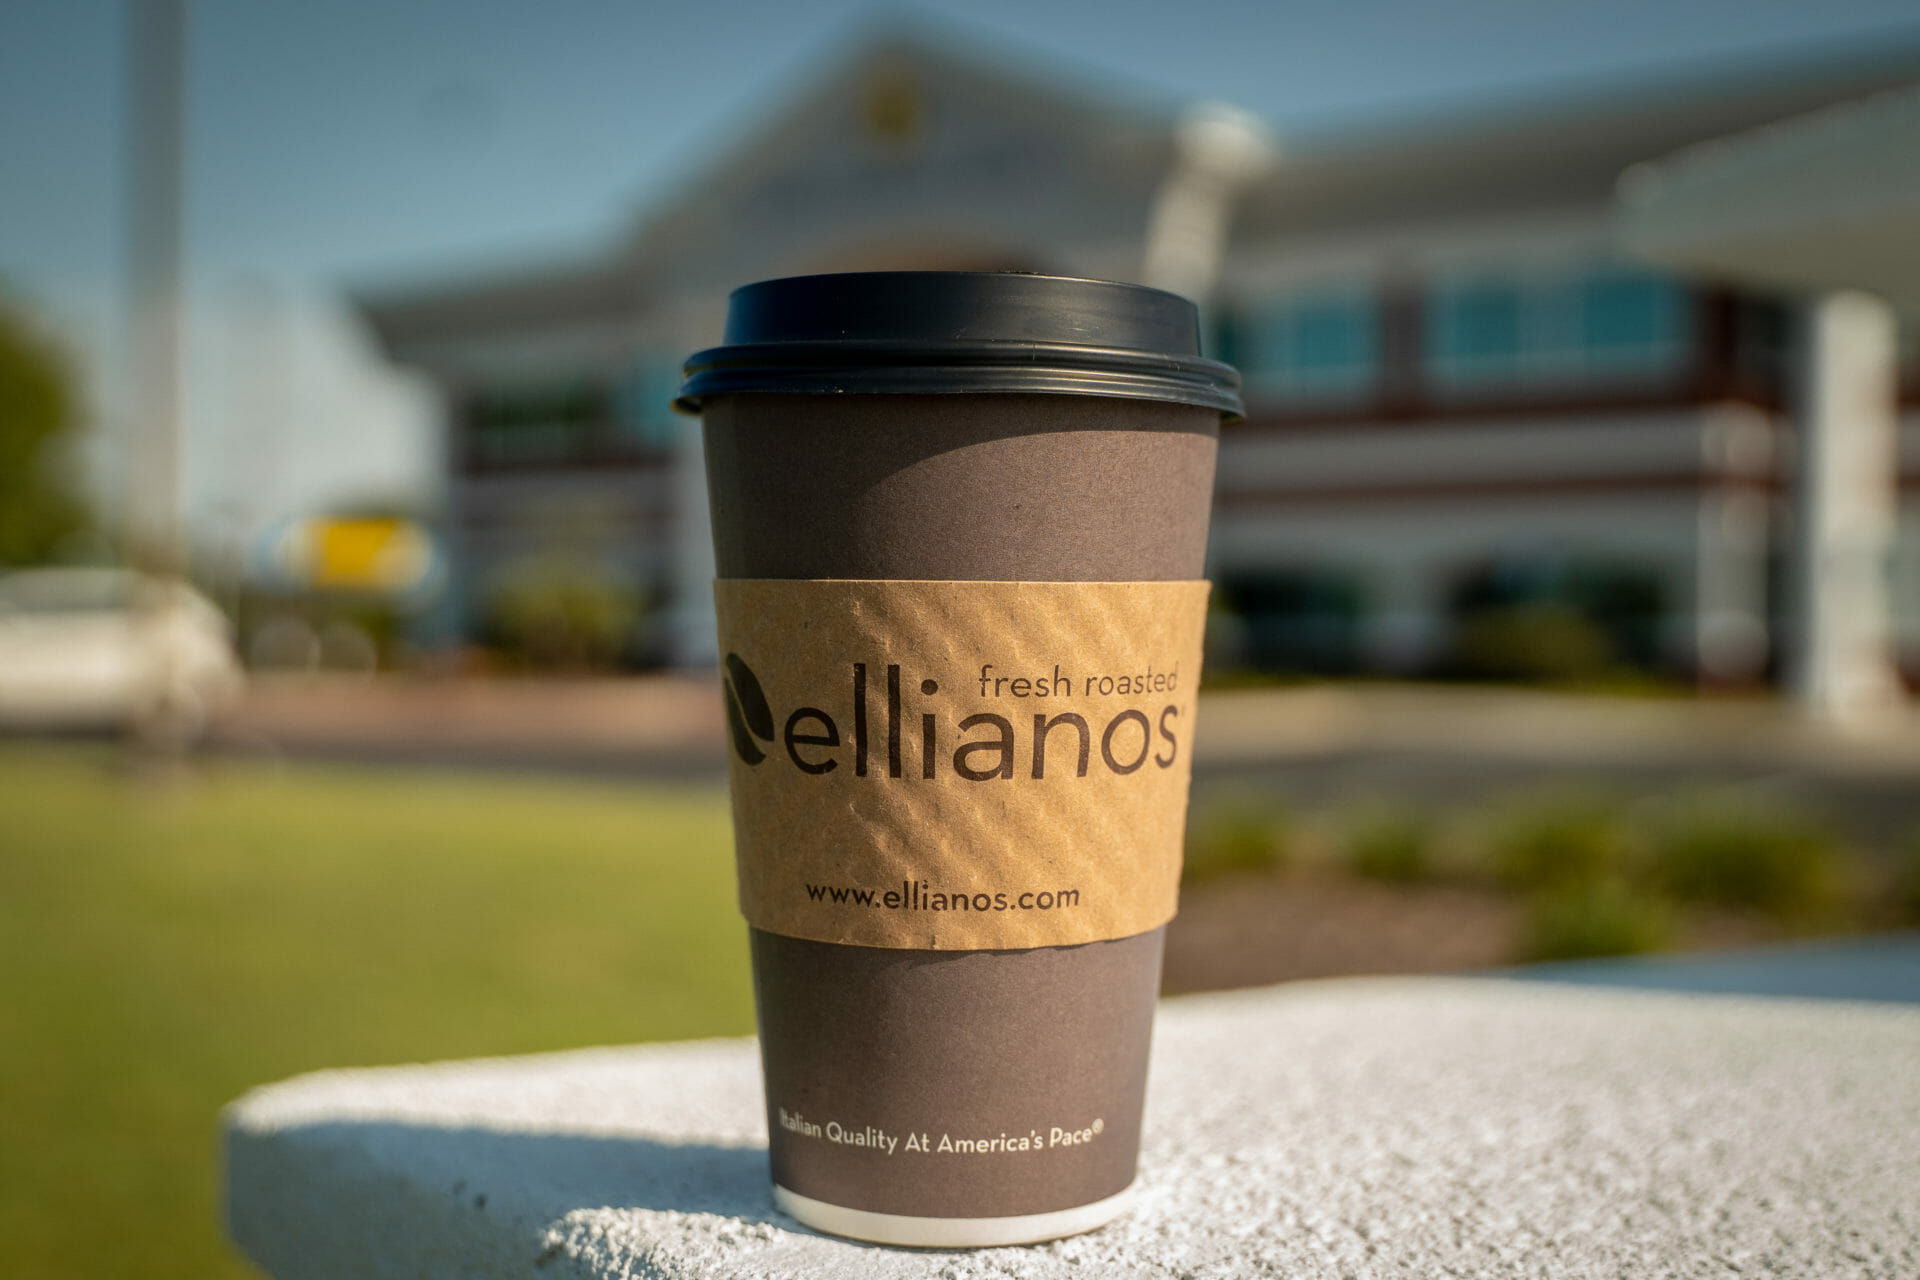 Ellianos Coffee Partners with First Federal Bank to Secure $25 Million in Funding for Franchisees